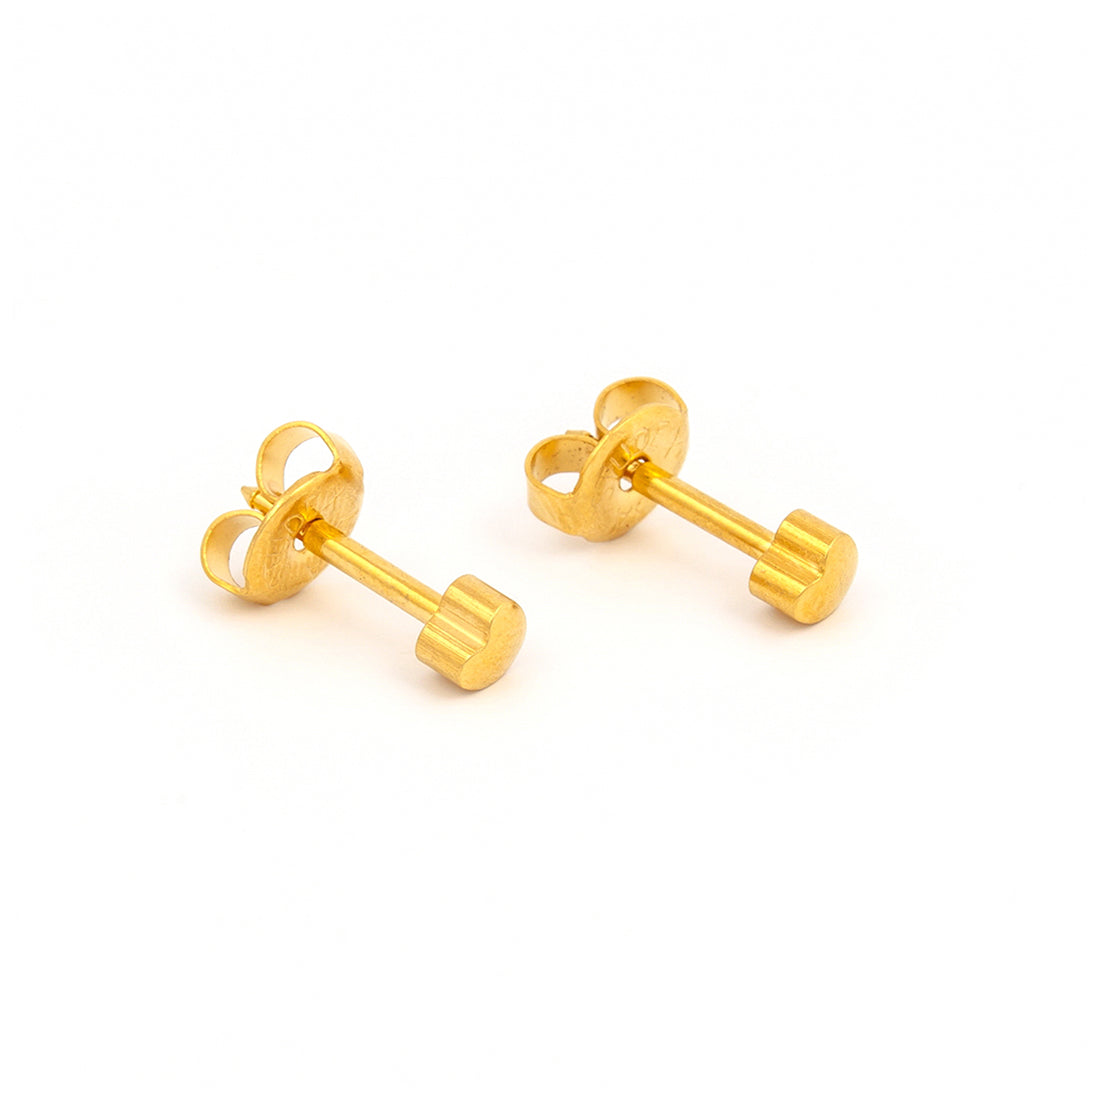 4MM Heart 24K Pure Gold Plated Piercing Ear Stud